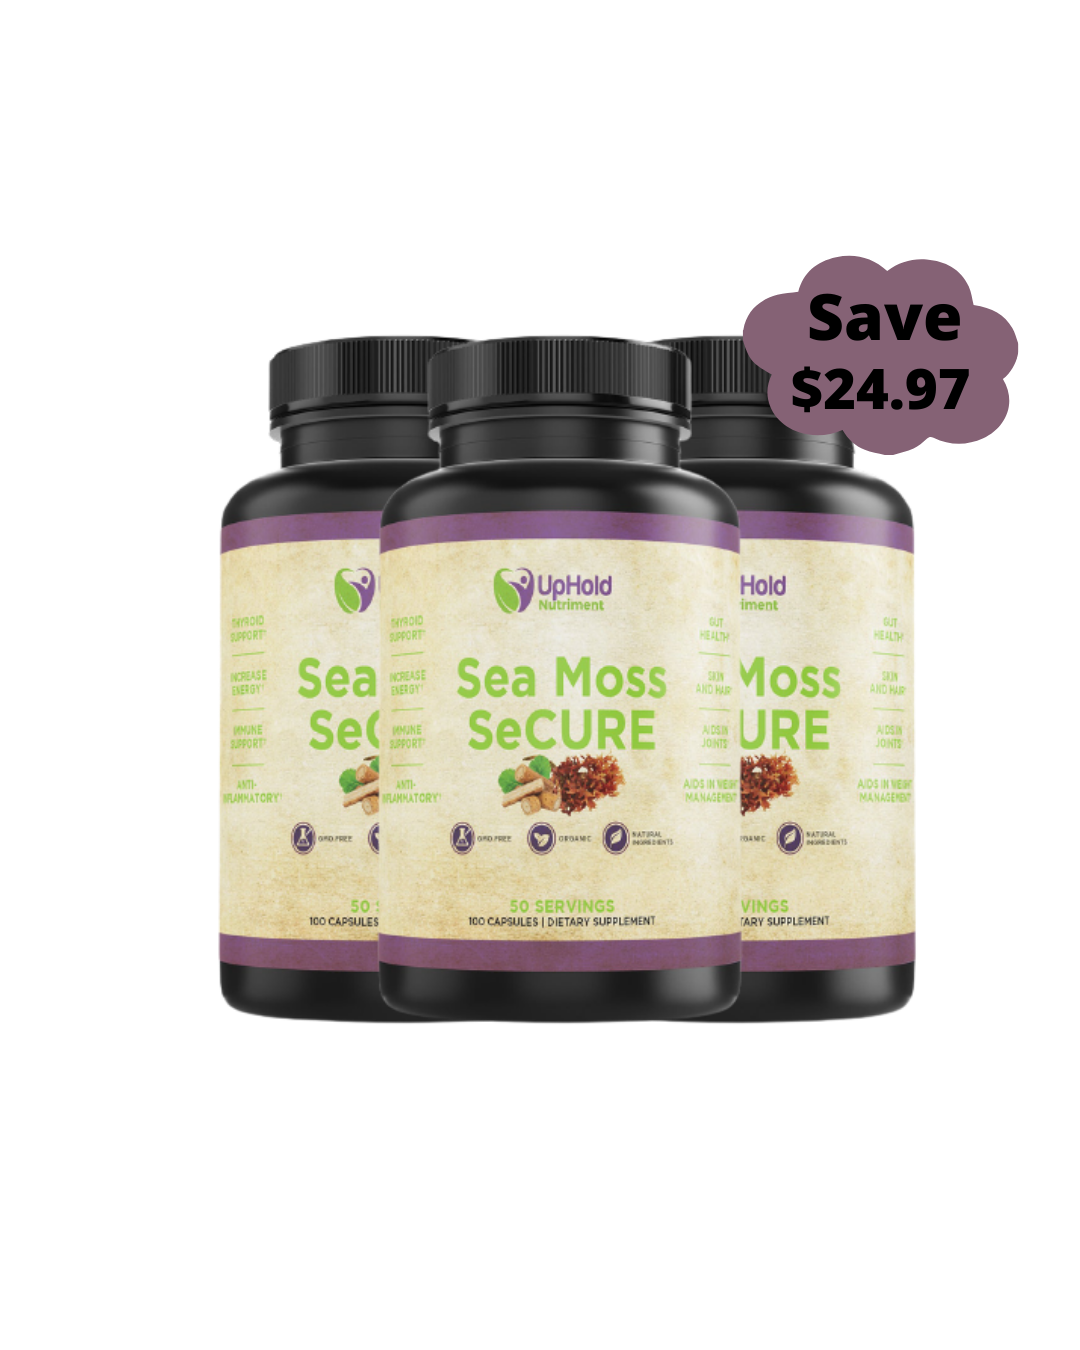 Sea Moss Secure (3 Bottles Monthly Subscription)